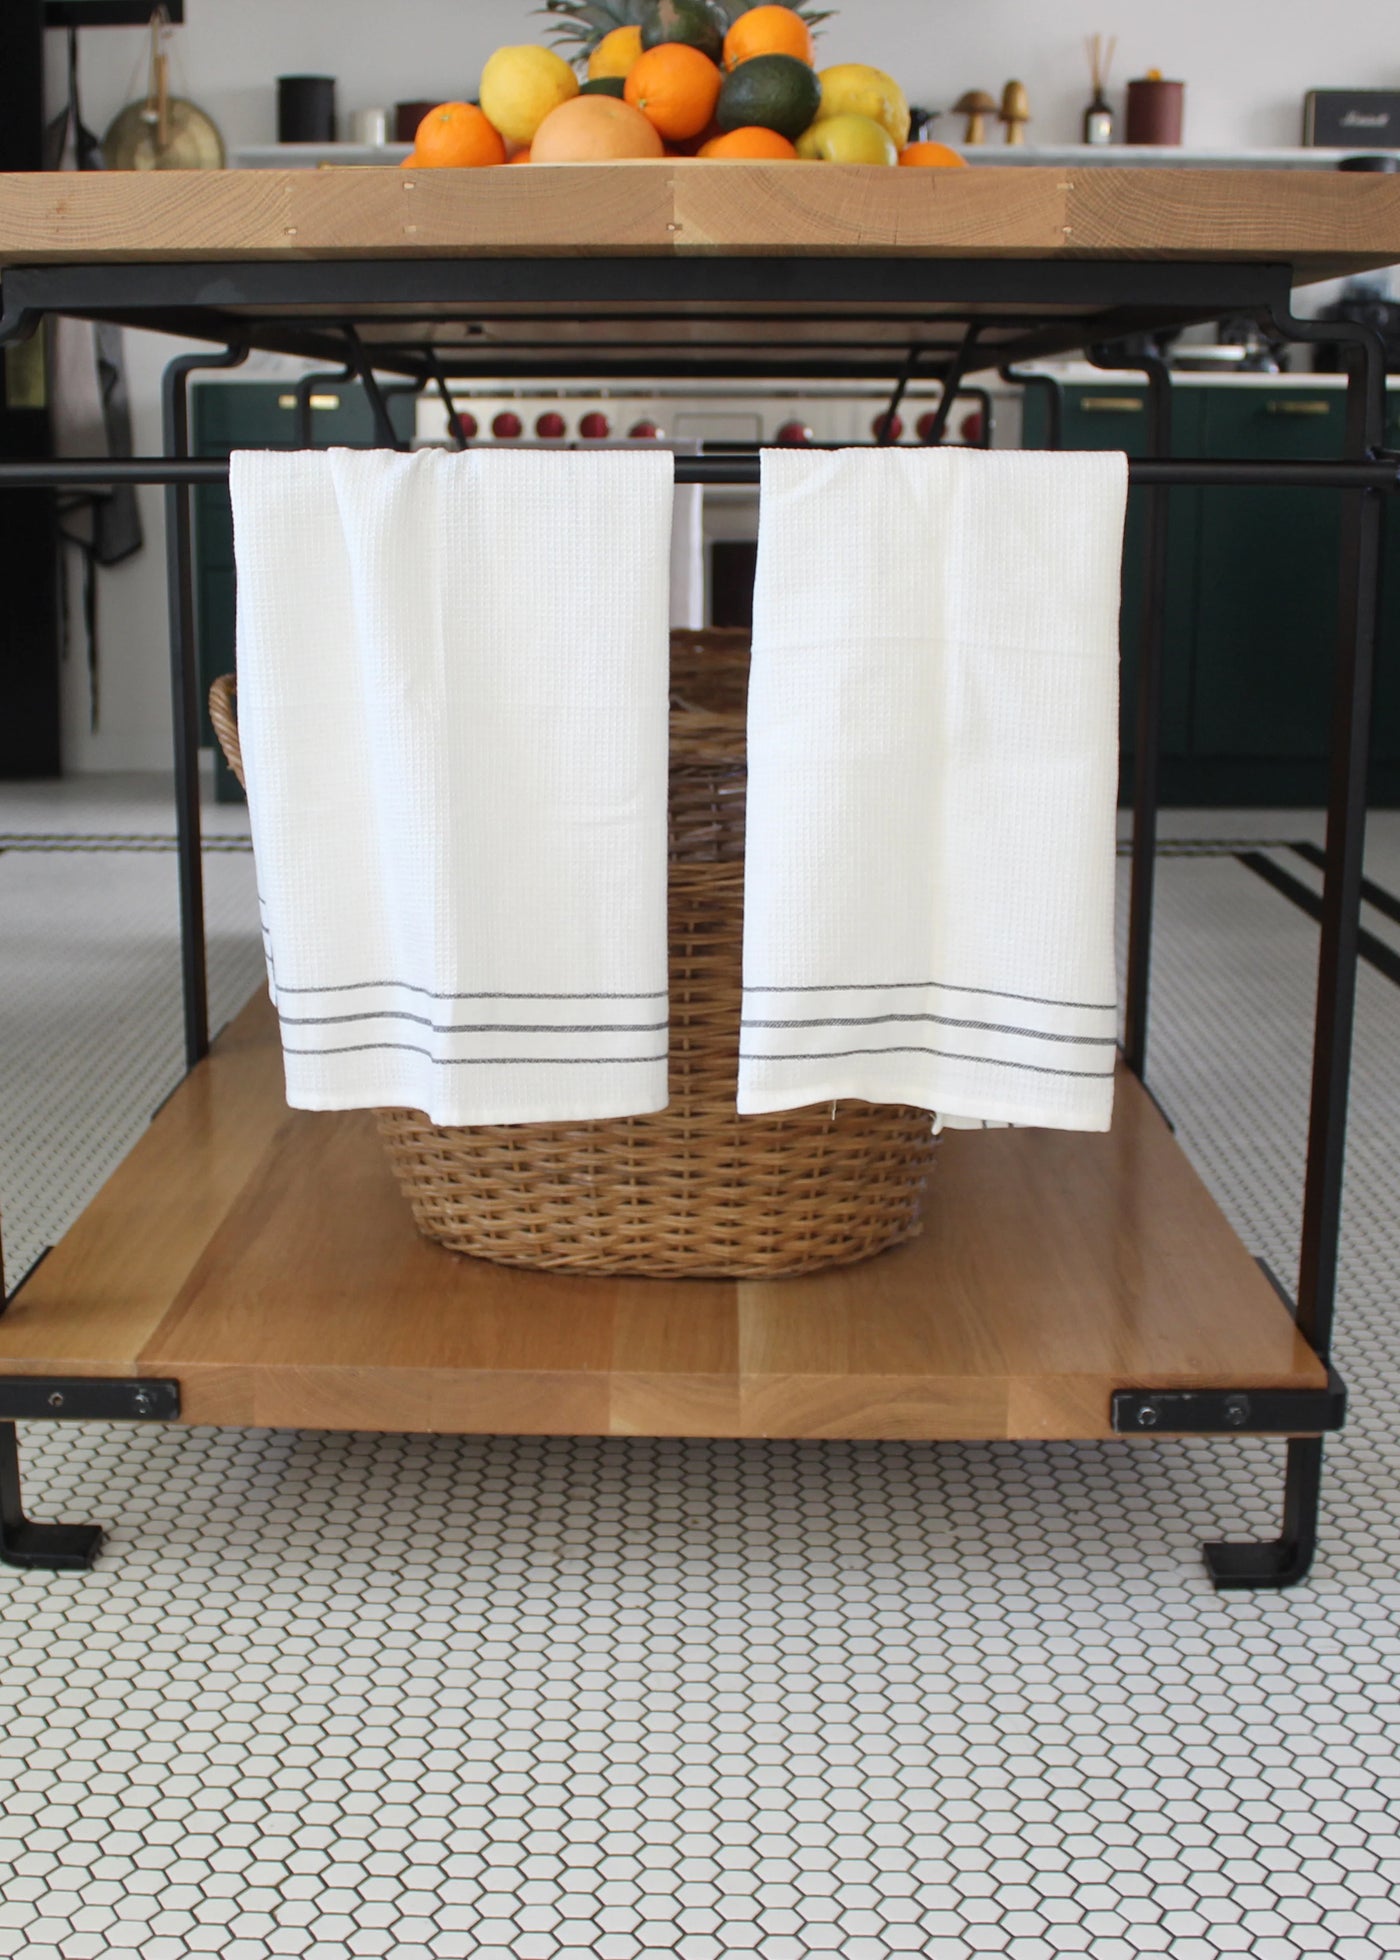 Natural Cotton Waffle Weave Tea Towel - absorbent kitchen cloth